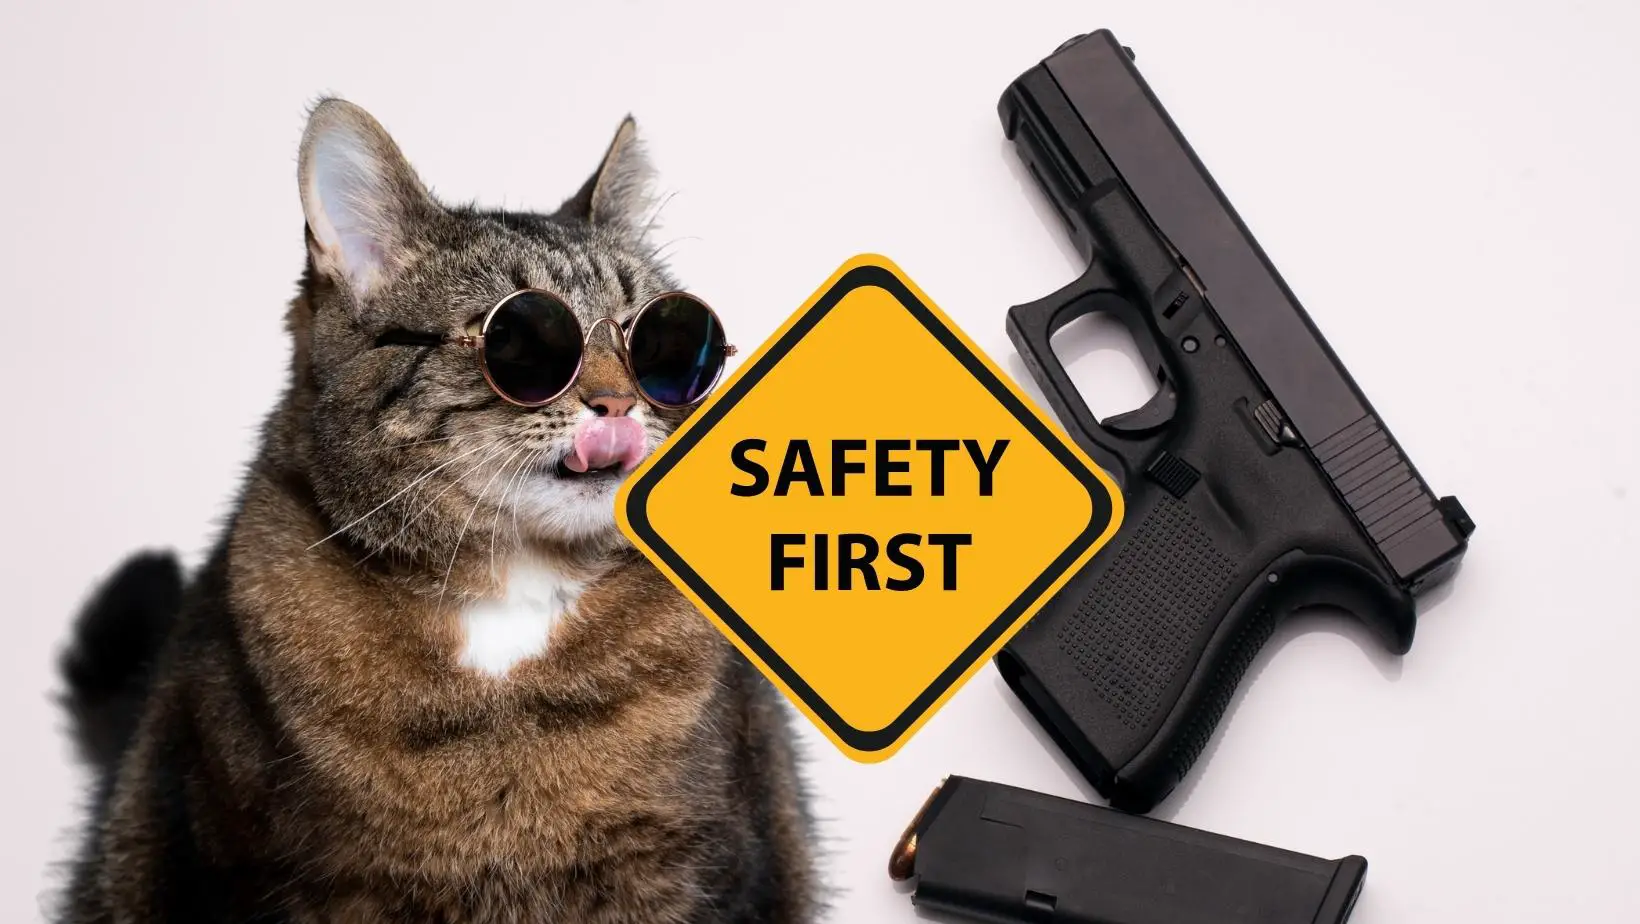 How to Teach Your Cat About Gun Safety?